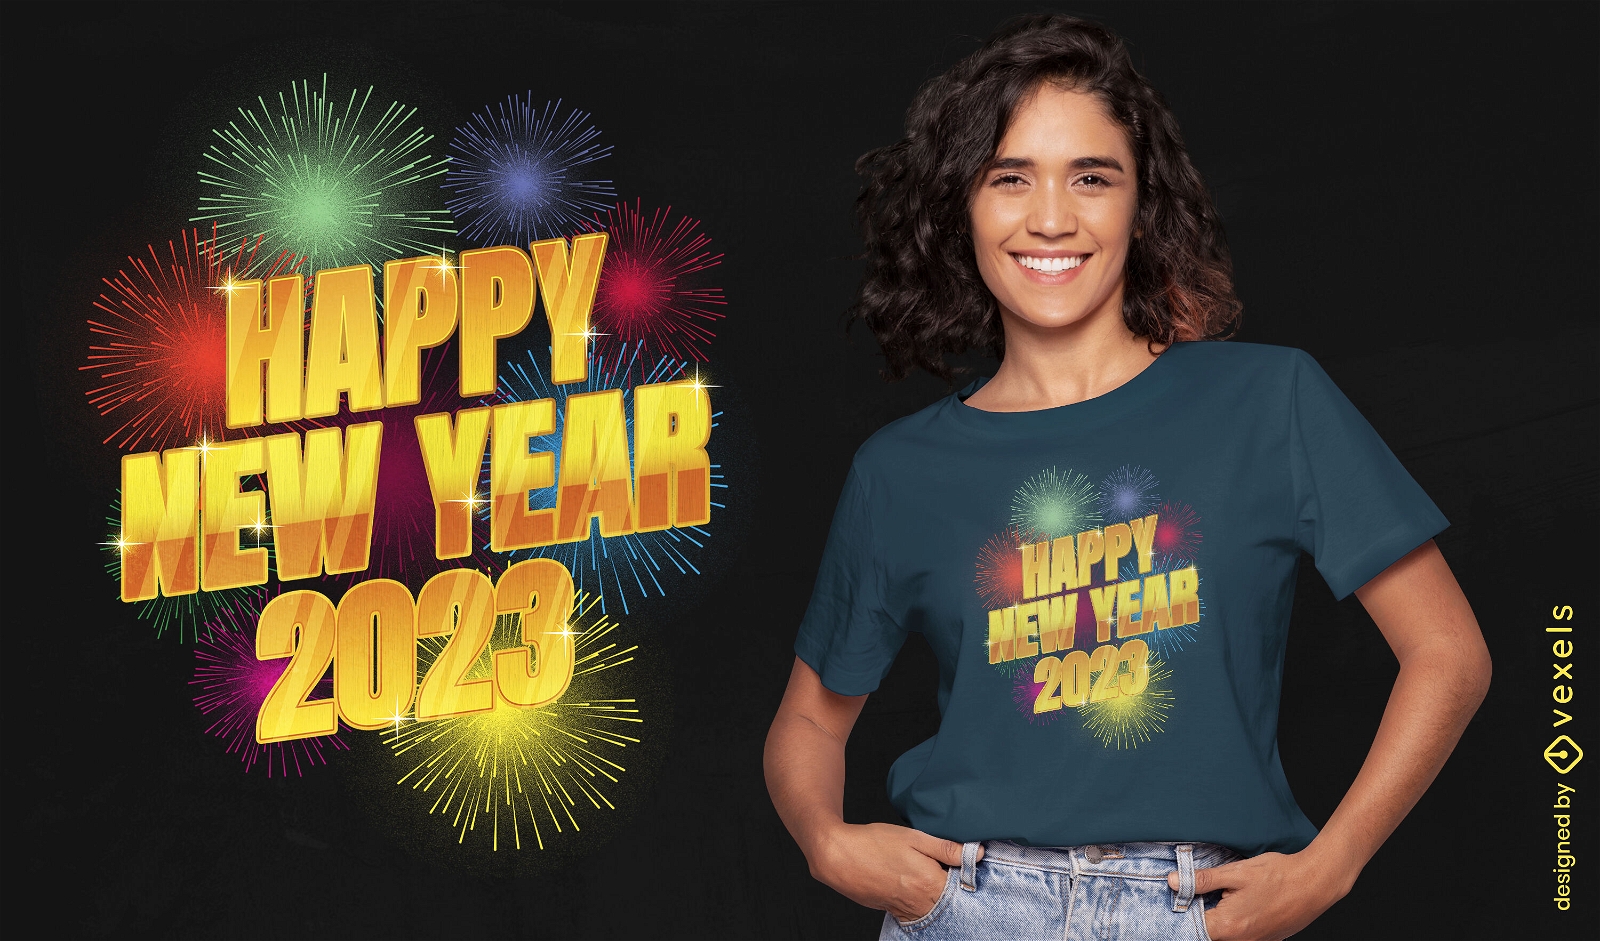 New year party with fireworks t-shirt psd